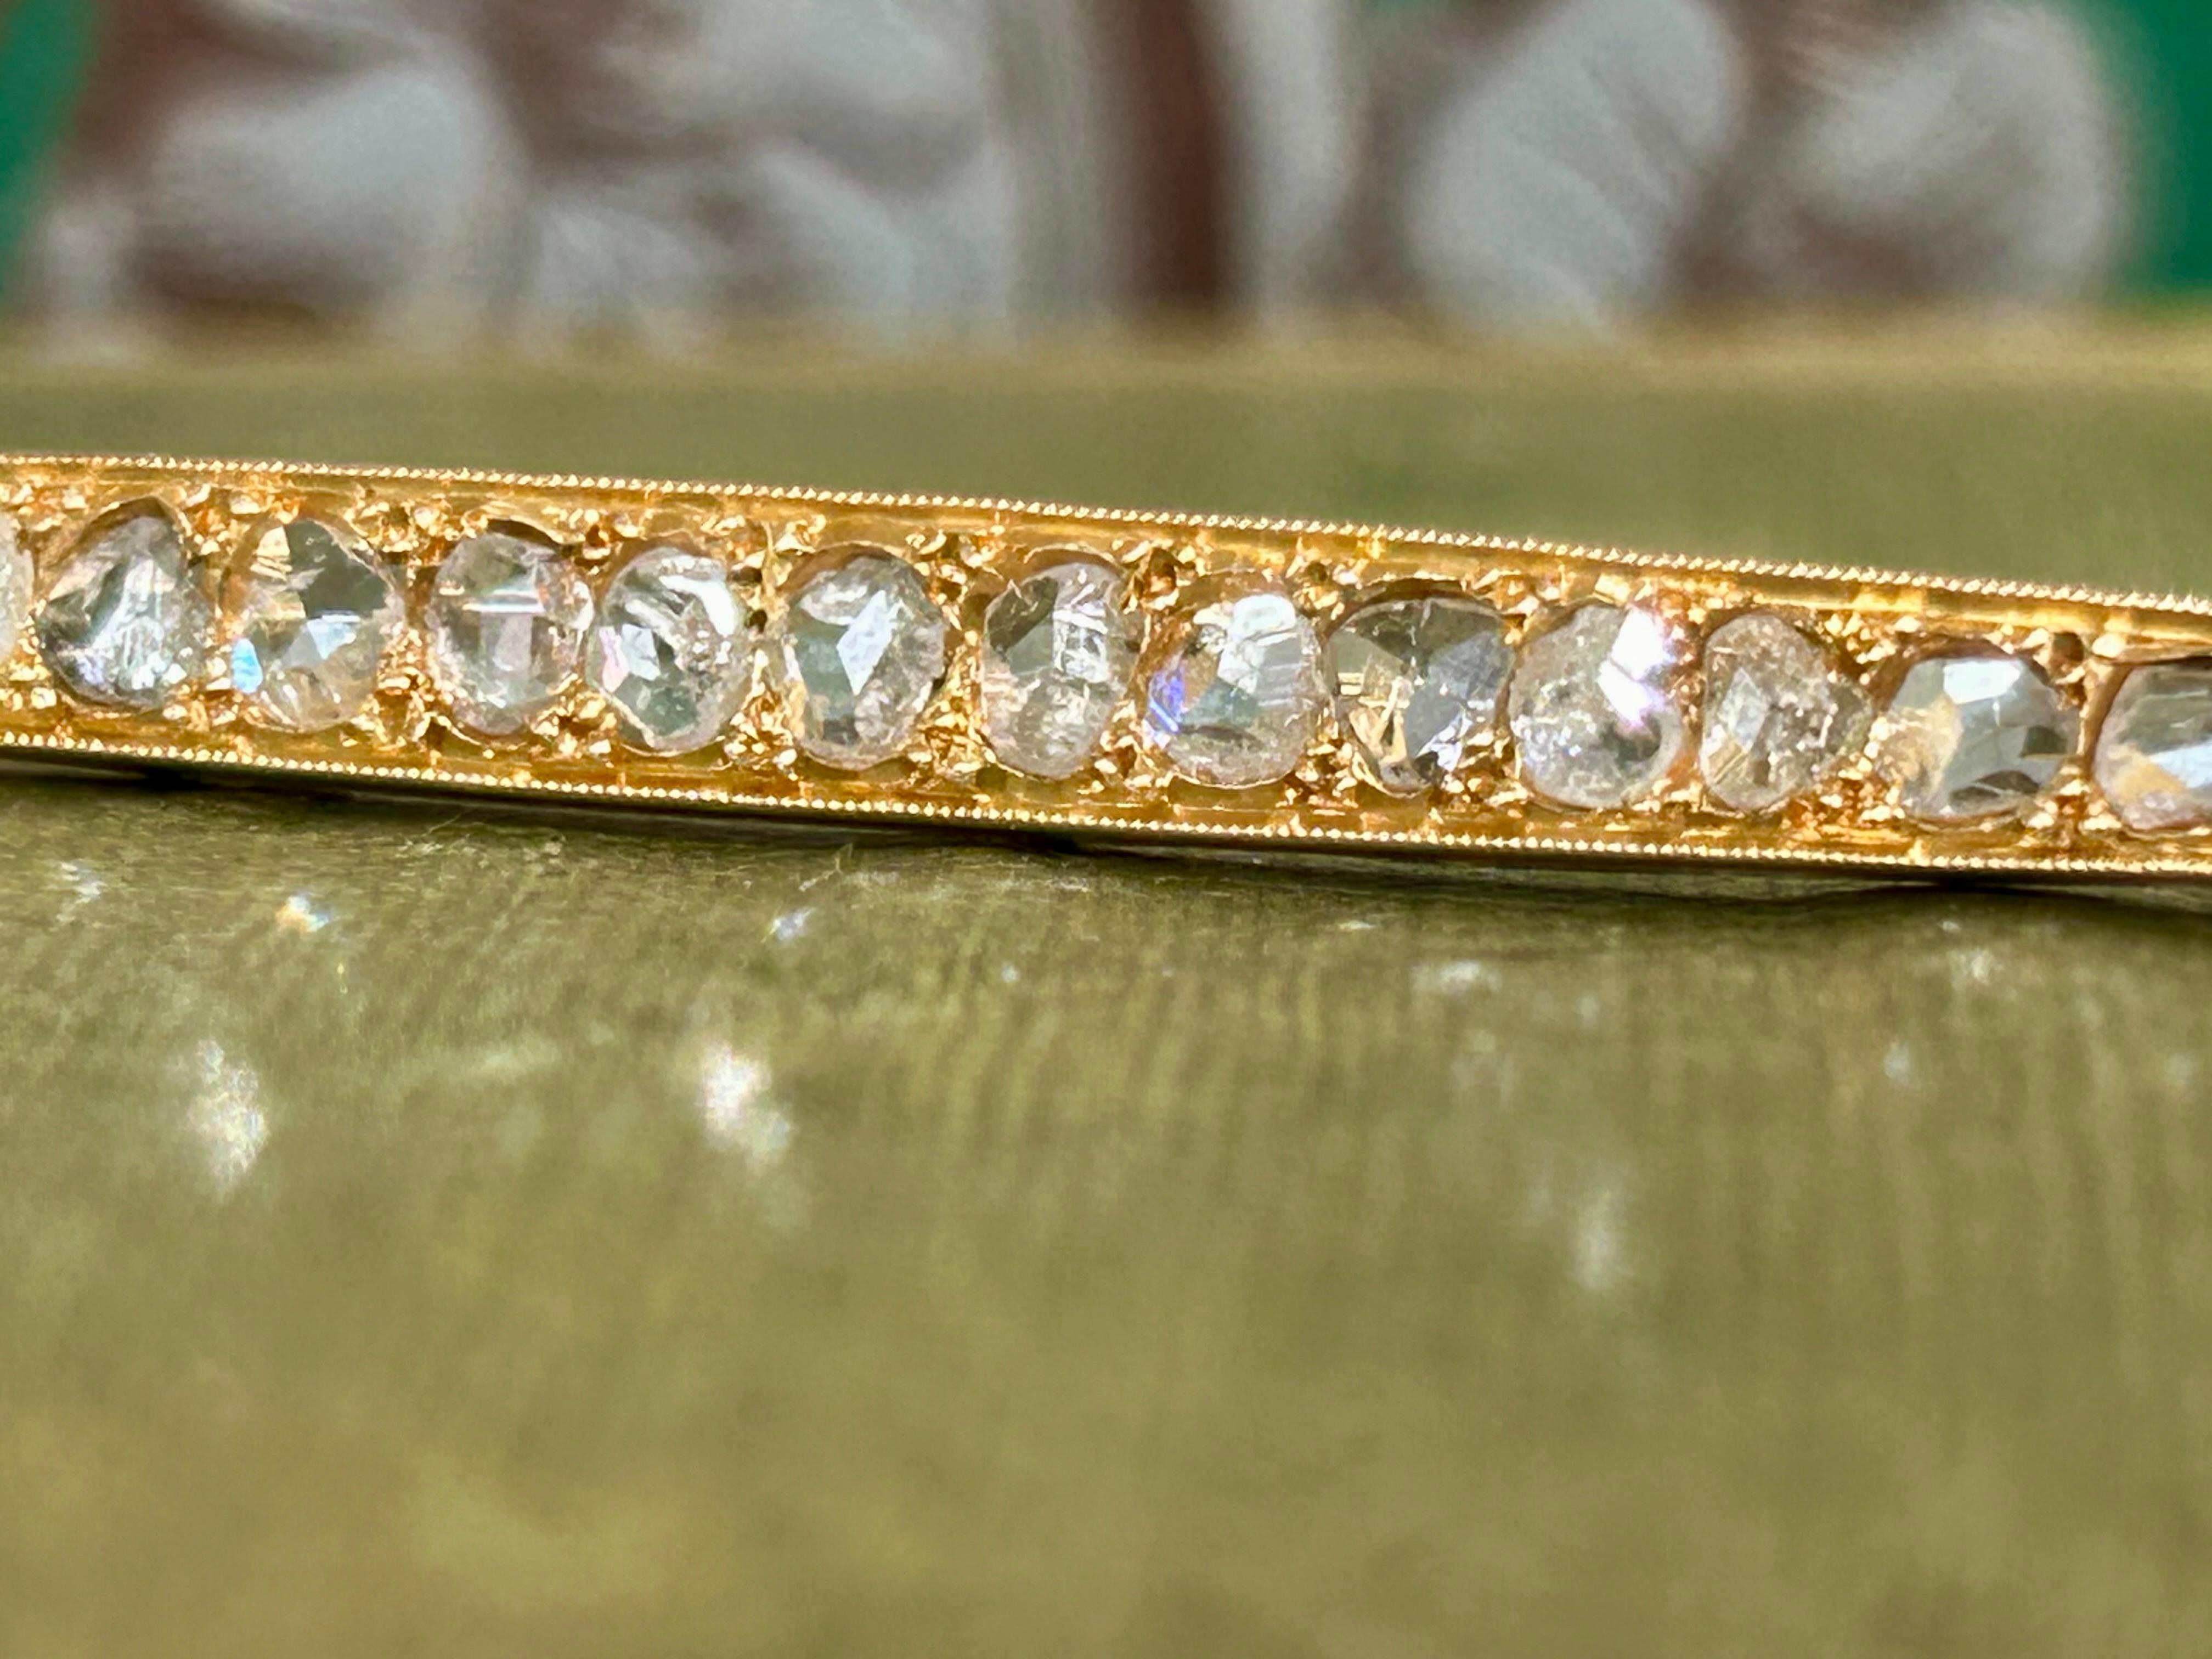 Antique 1.5 carat Rose Cut Diamond Bar Brooch 14K Yellow Gold In Excellent Condition For Sale In Joelton, TN